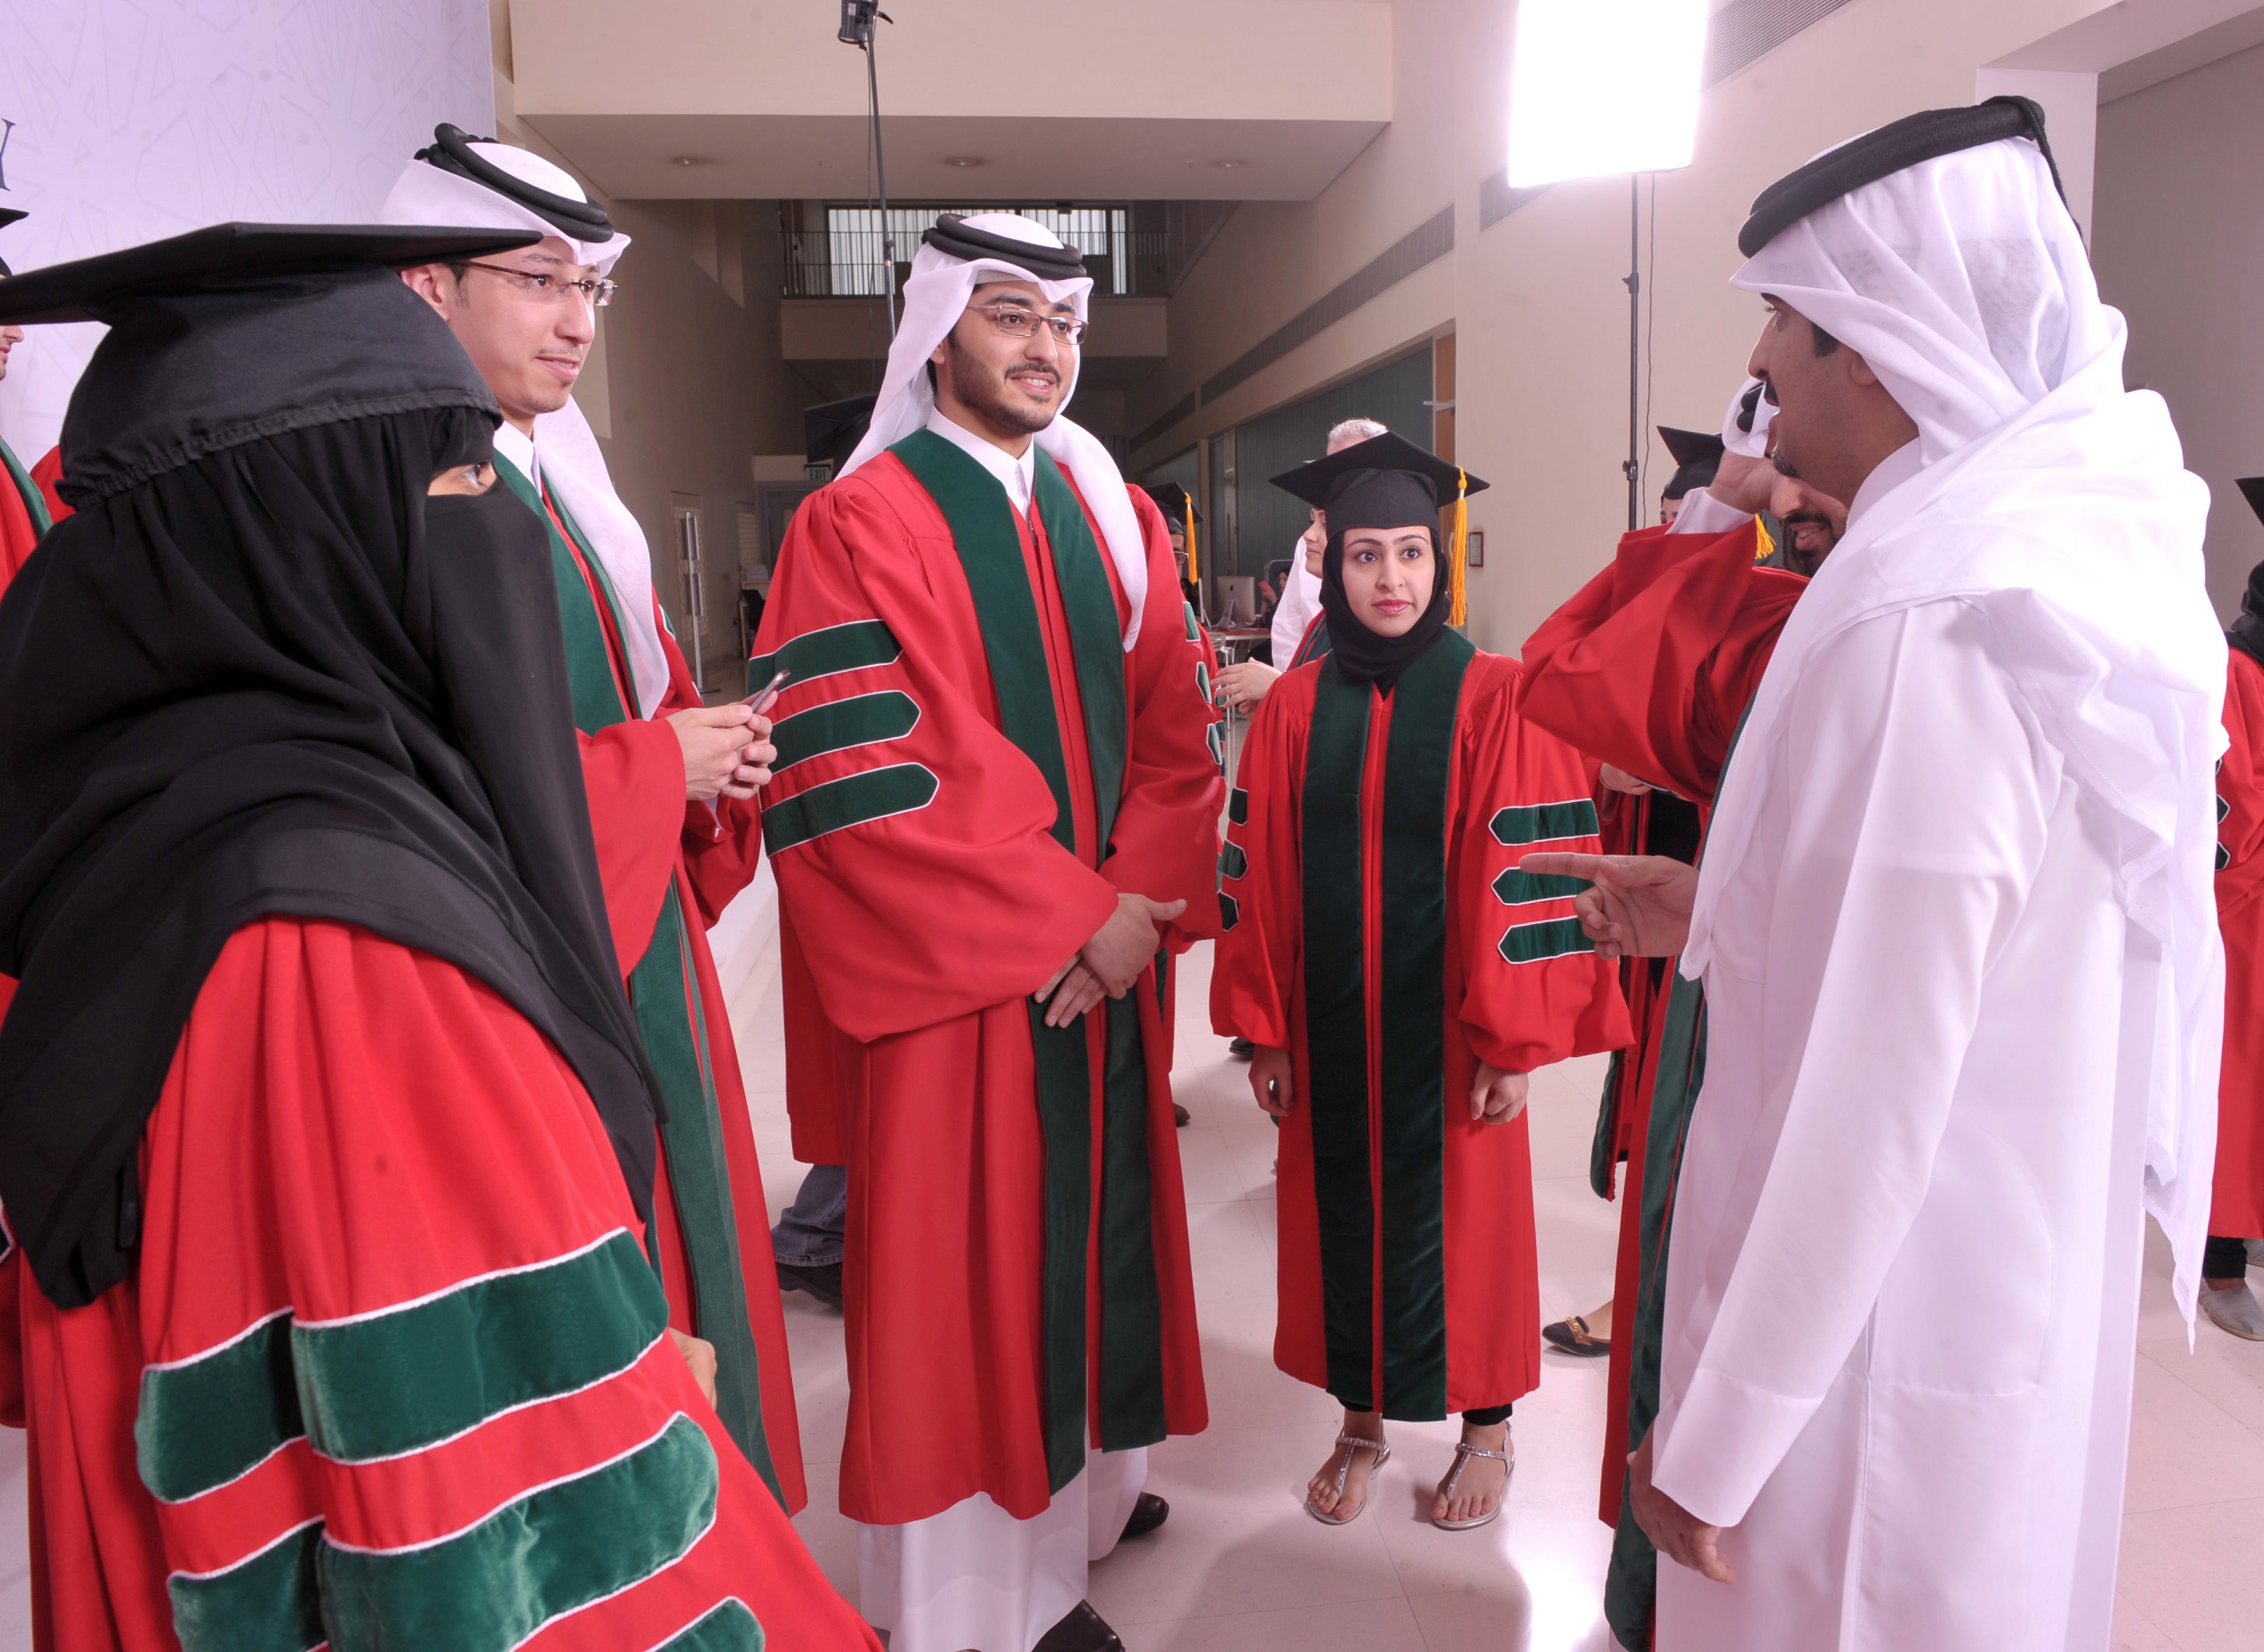 graduating students from Weill Cornell Medical College in Qatar have discussion with Minister of Health, His Excellency Abdulla bin Khalid Al Qahtani.